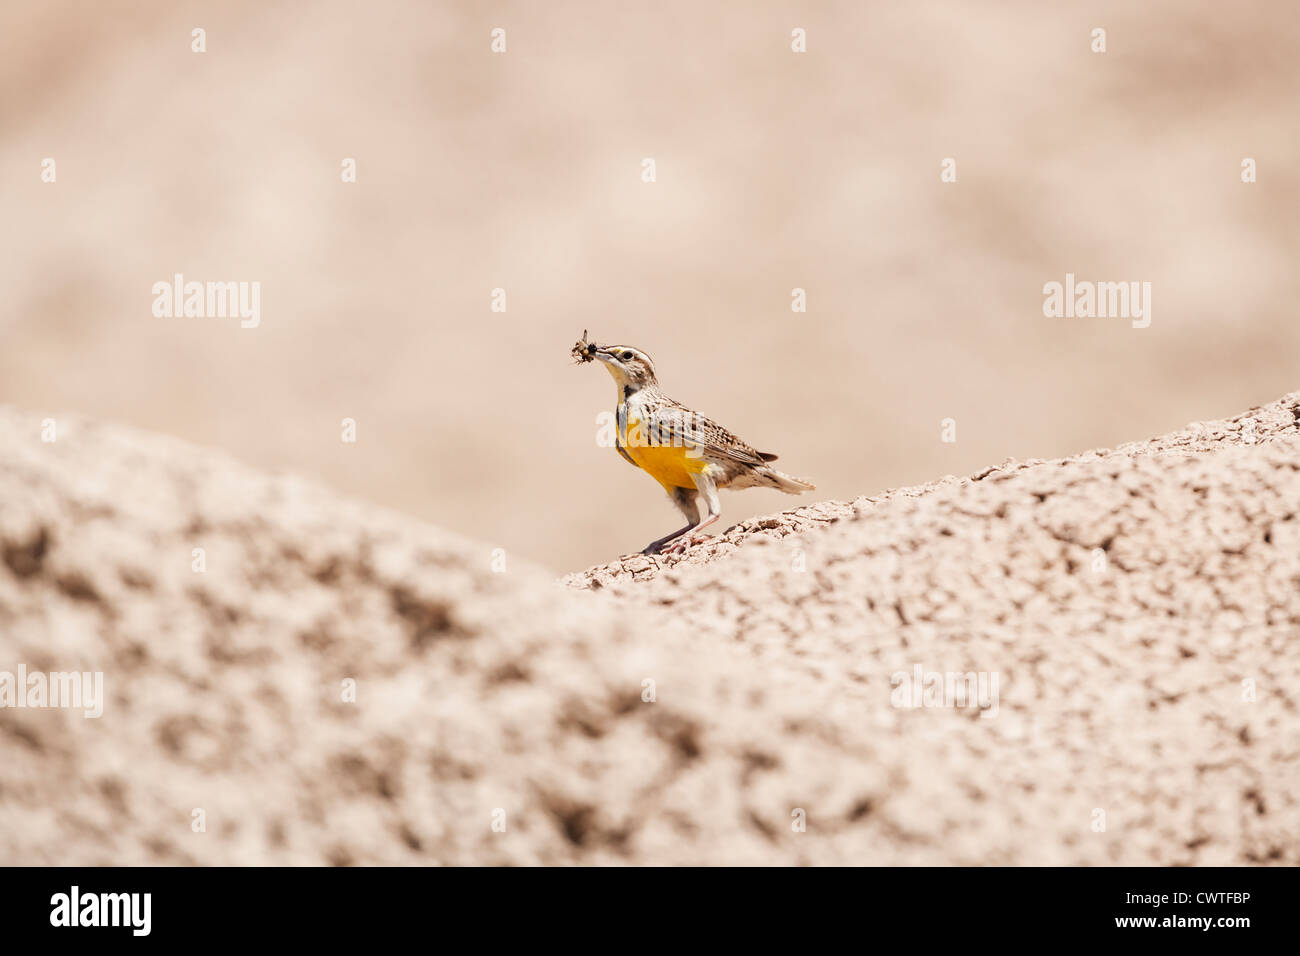 A Western Meadowlark holds an insect in its beak - South Dakota Badlands. Stock Photo